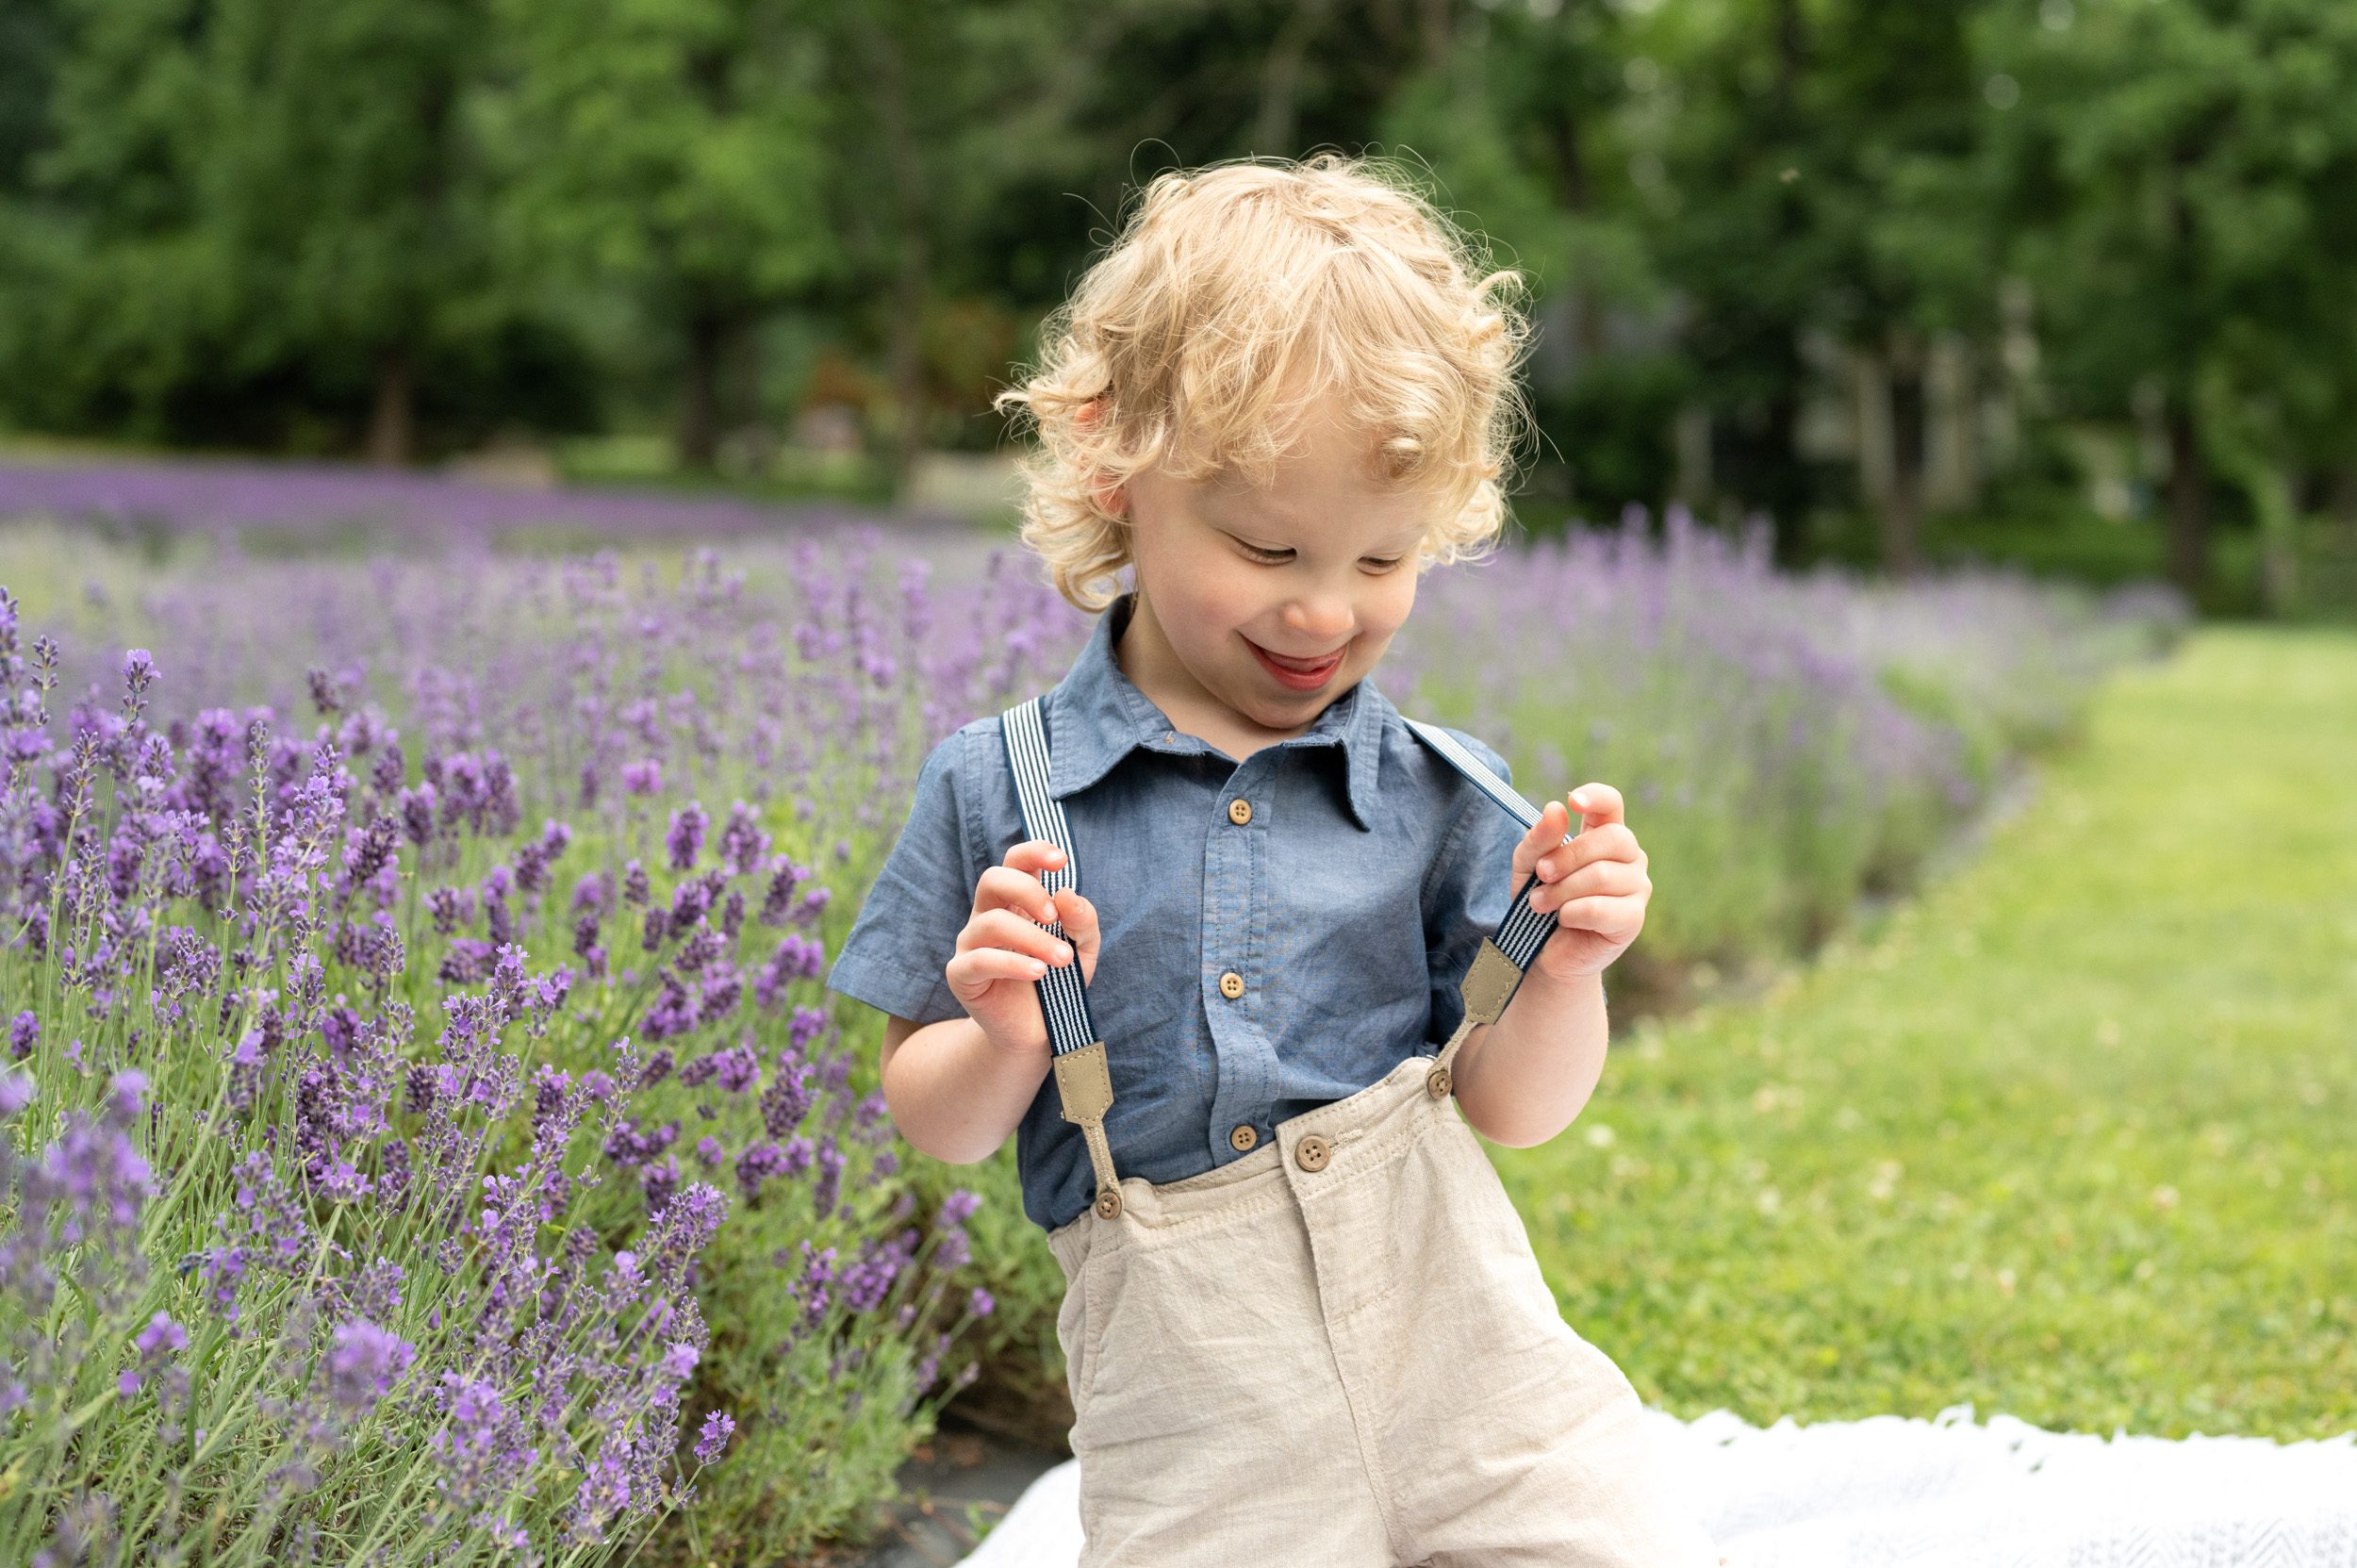 a little boy siting in front of a lavender field in full bloom laughing as he plays with his suspenders 